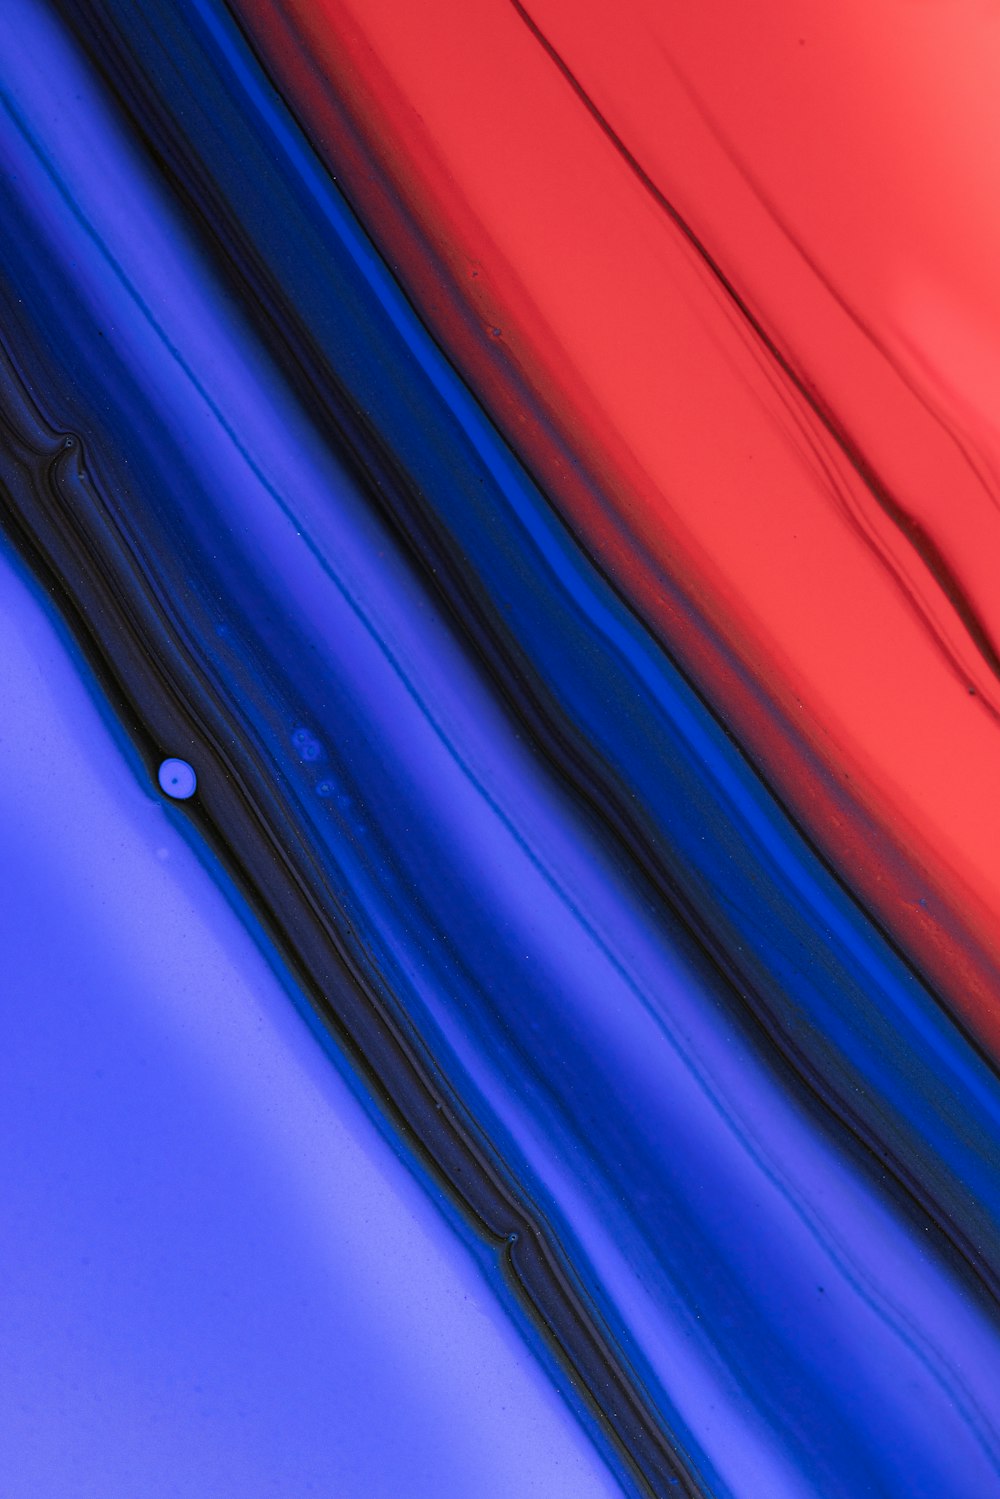 a close up of a red, blue, and black object